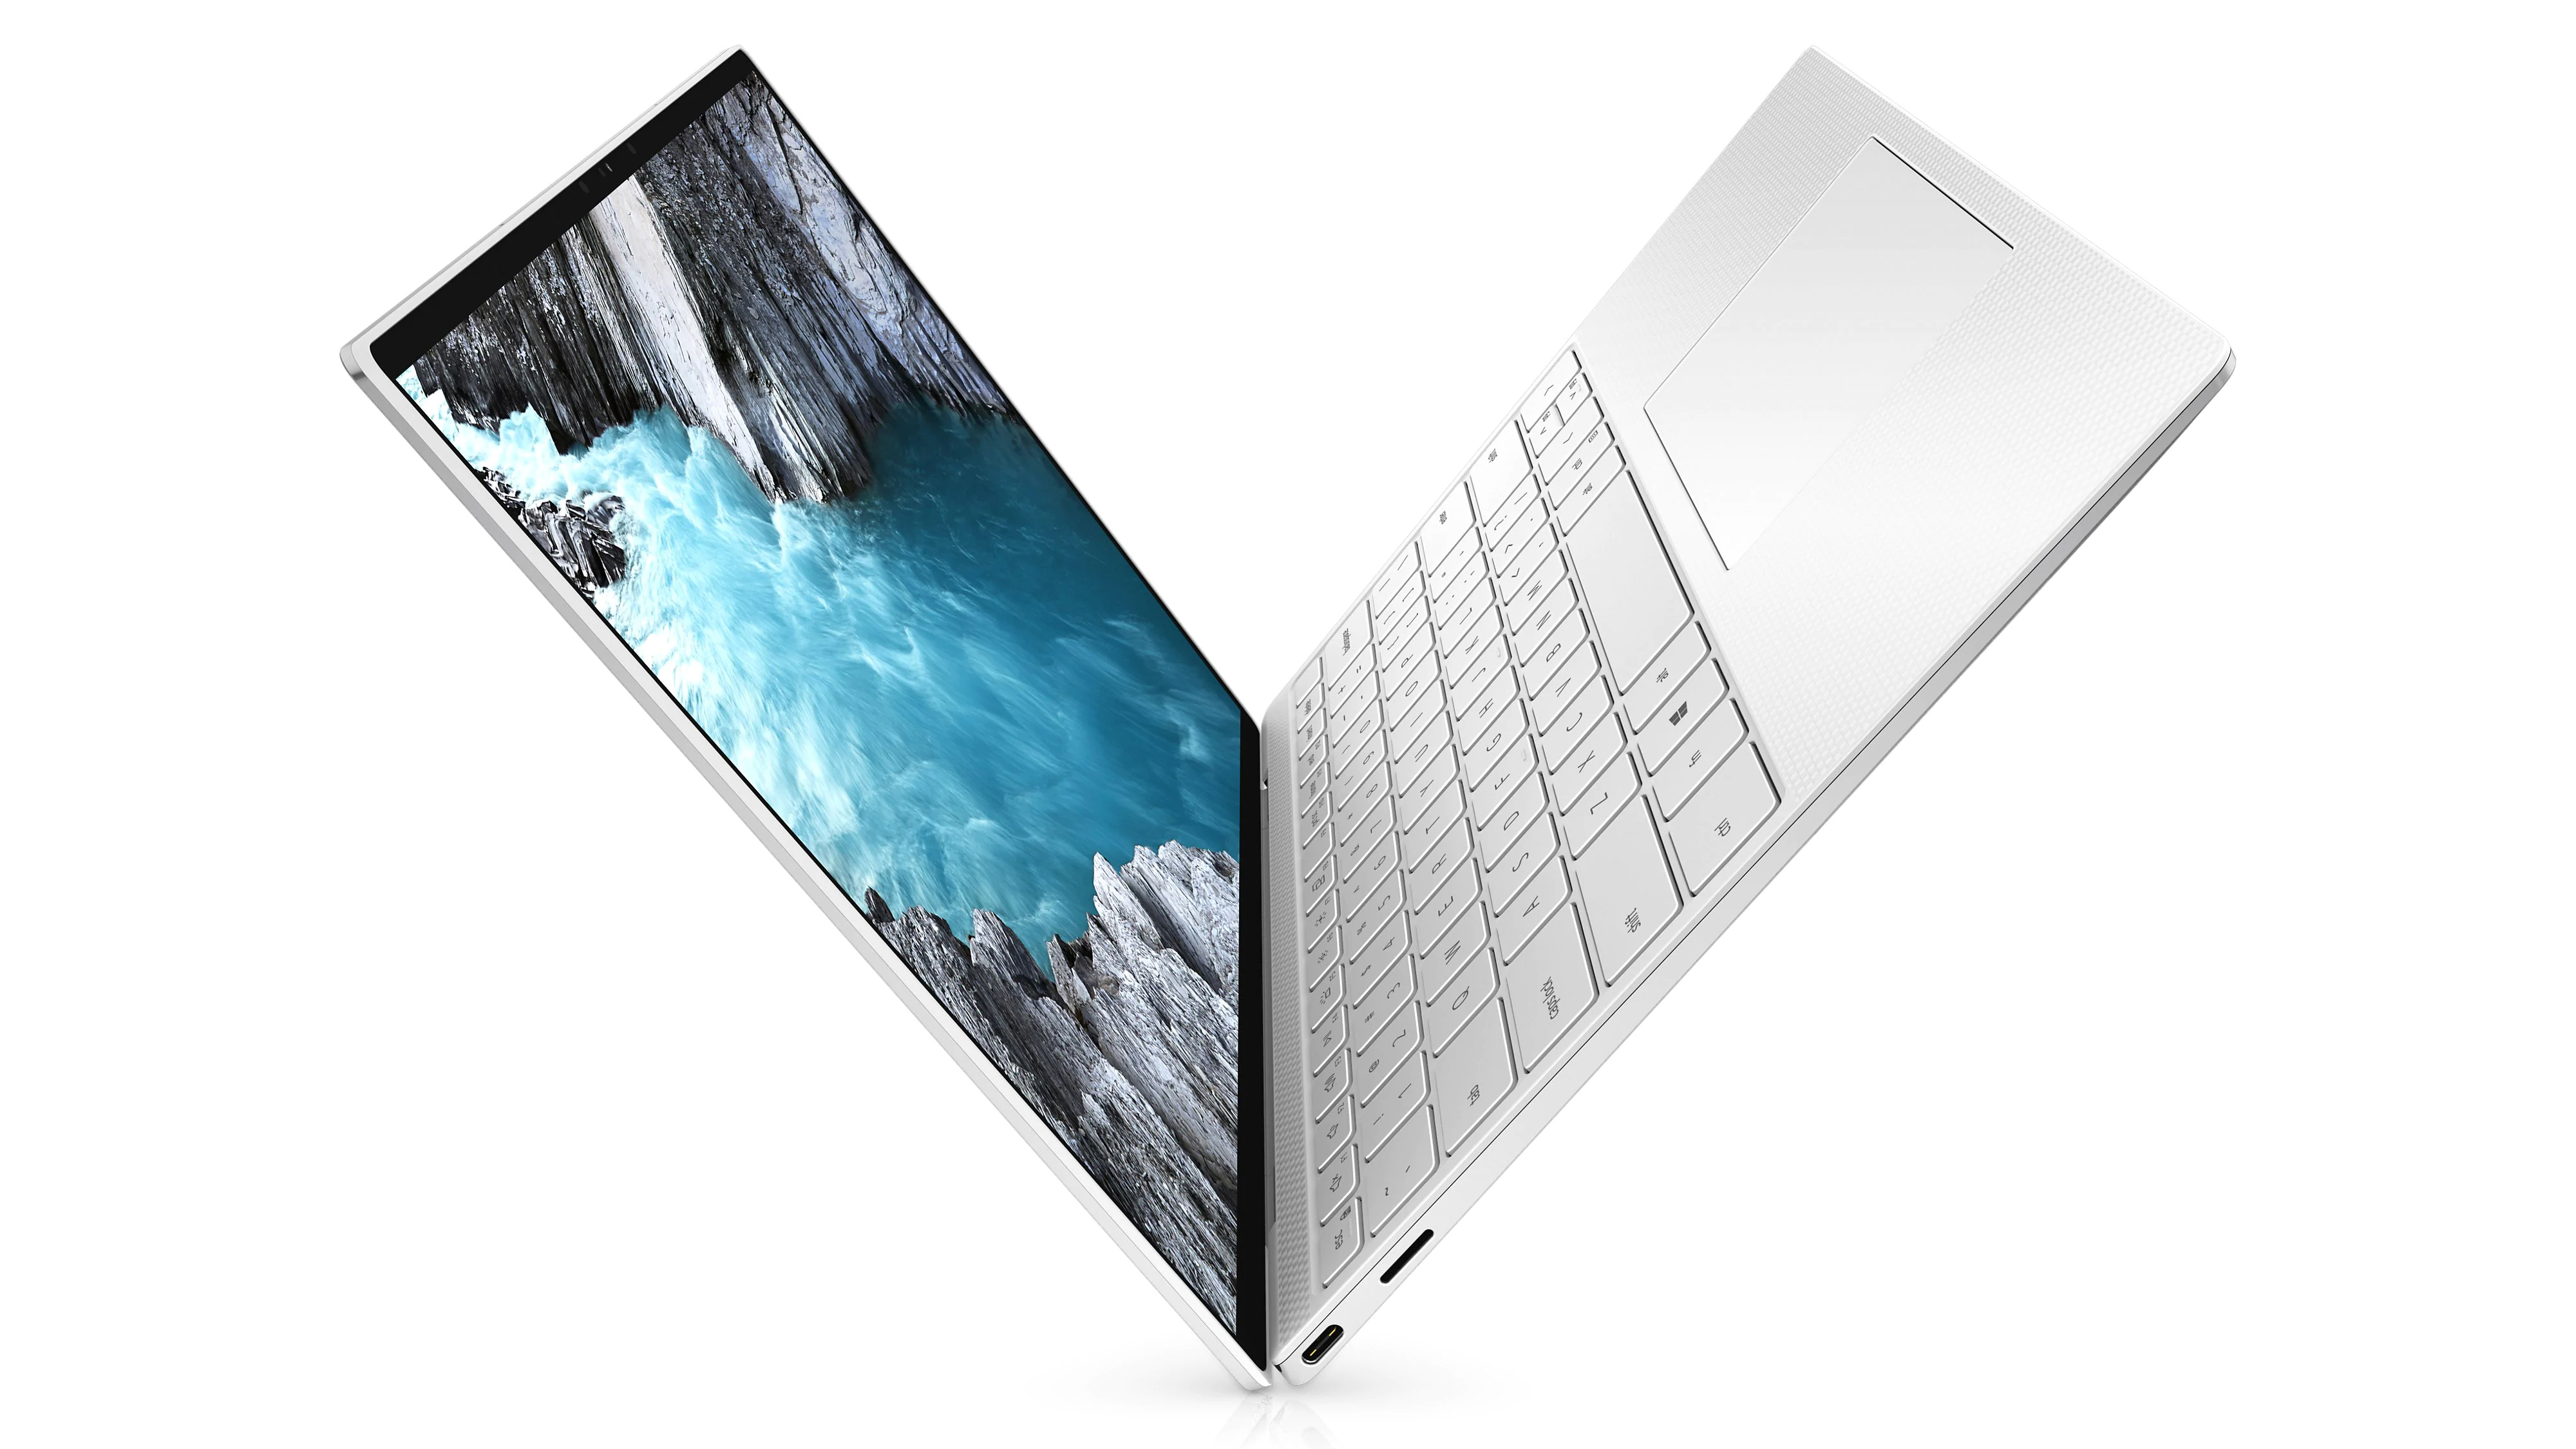 Dell XPS 13 (Late 2020)